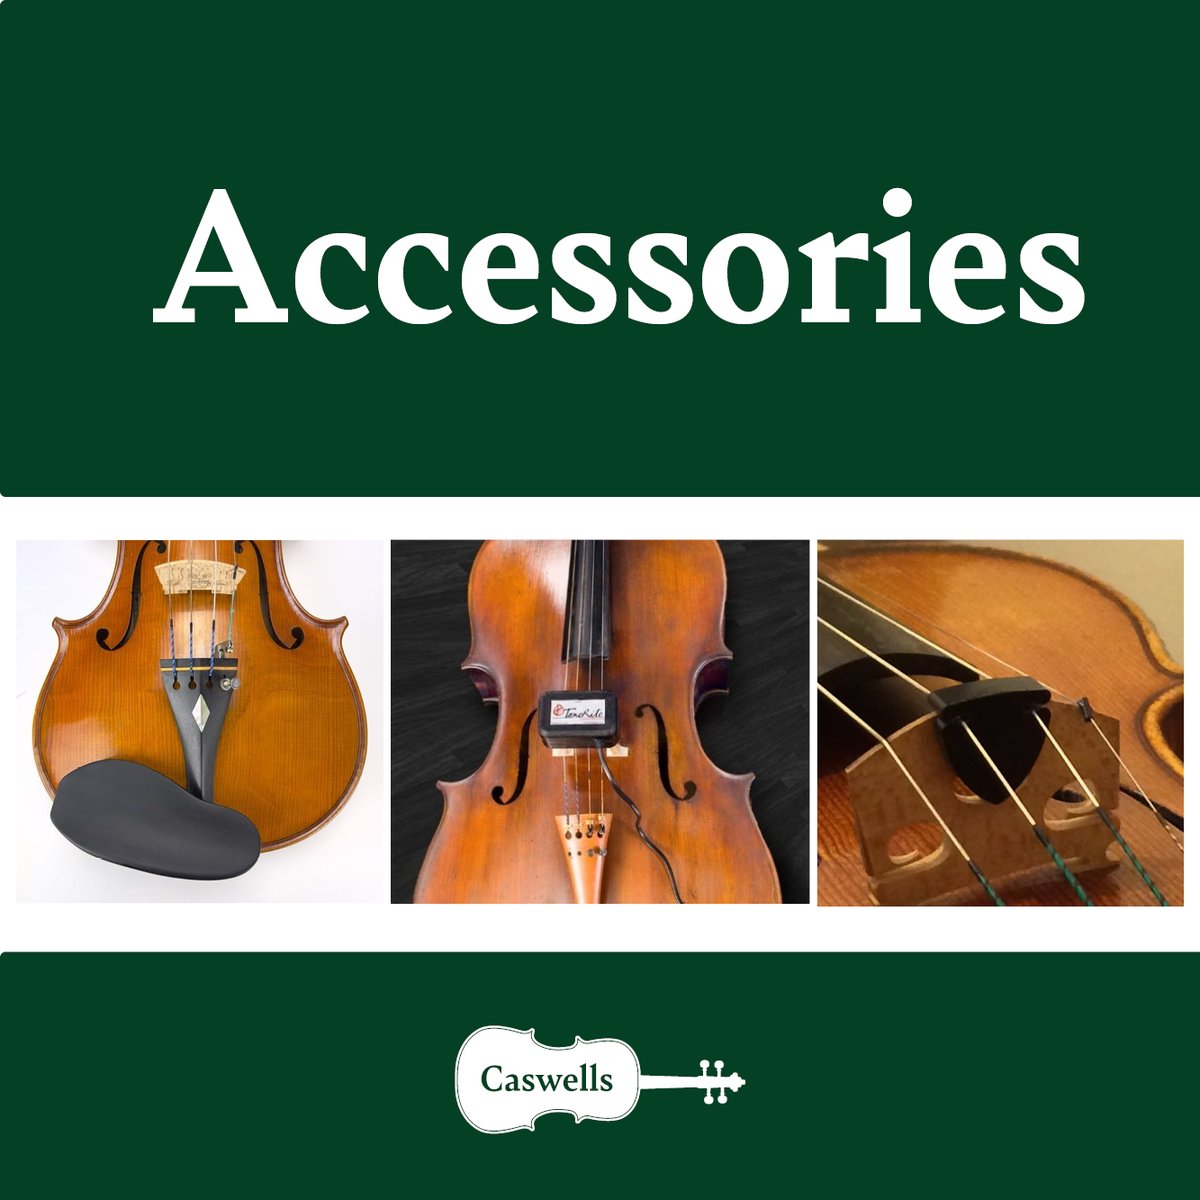 Browse our extensive range of accessories for stringed instruments. From floor anchors and wedge cushions for cellists, through every type of shoulder and chin rest, we have everything your new students may need to get started.
#musicteacher #musiccurriculum #stringinstruments